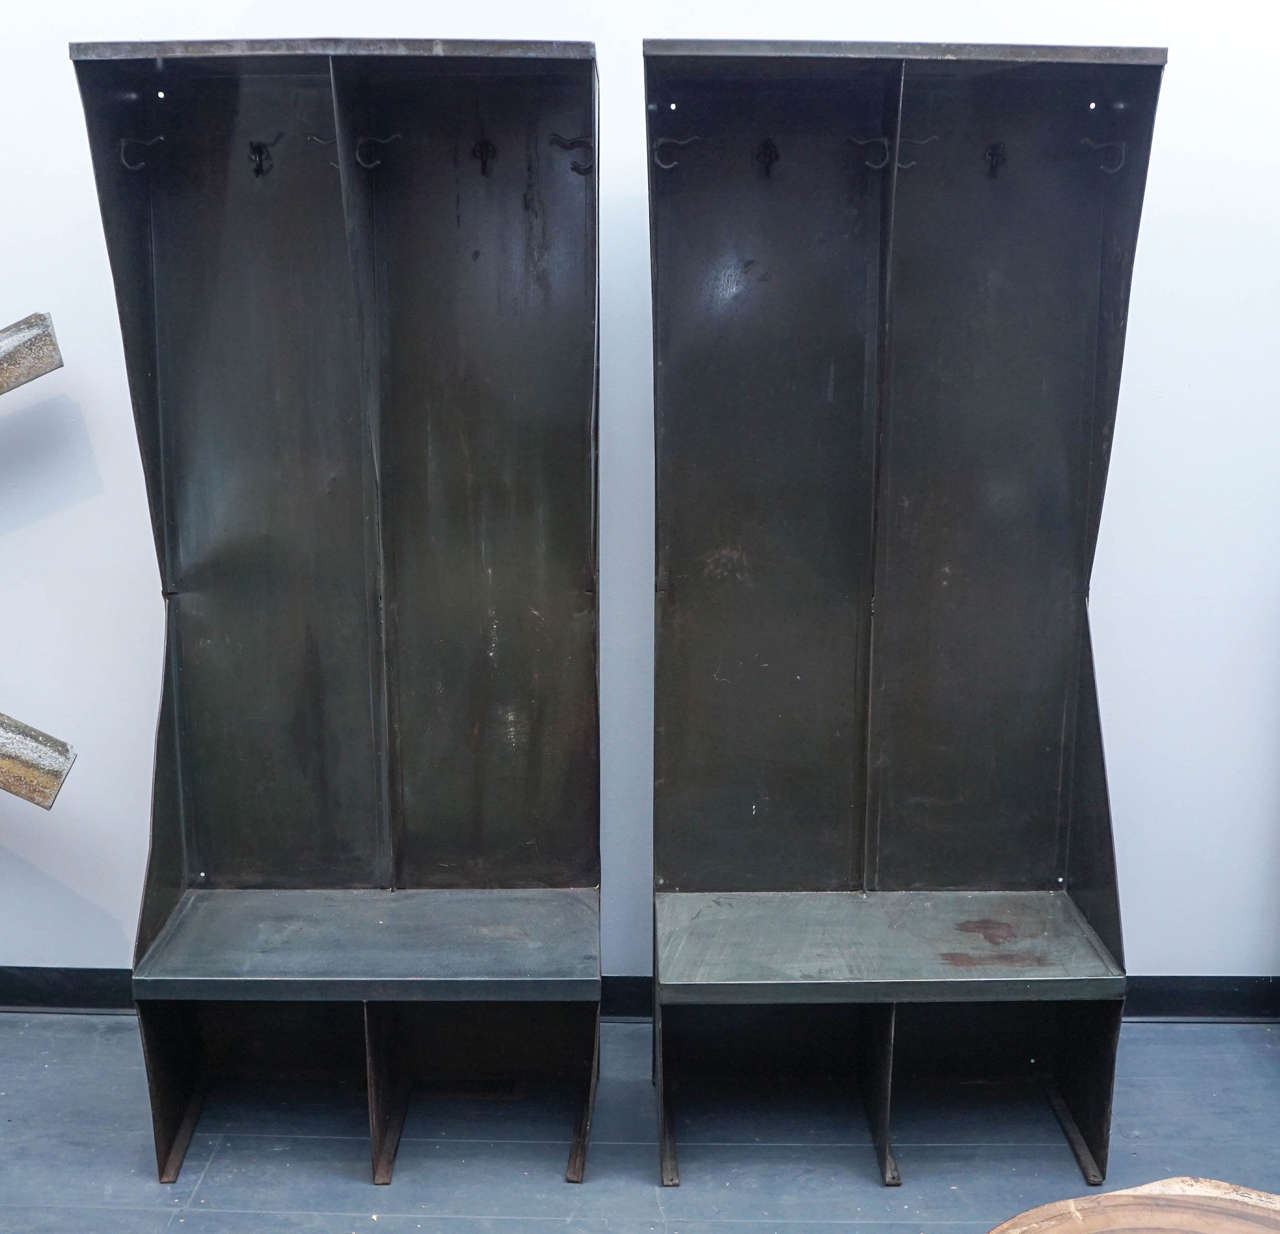 These pair of benches or open lockers create a single longer bench when placed together created from sturdy metal with a dark green finish.
Unique and visually interesting.